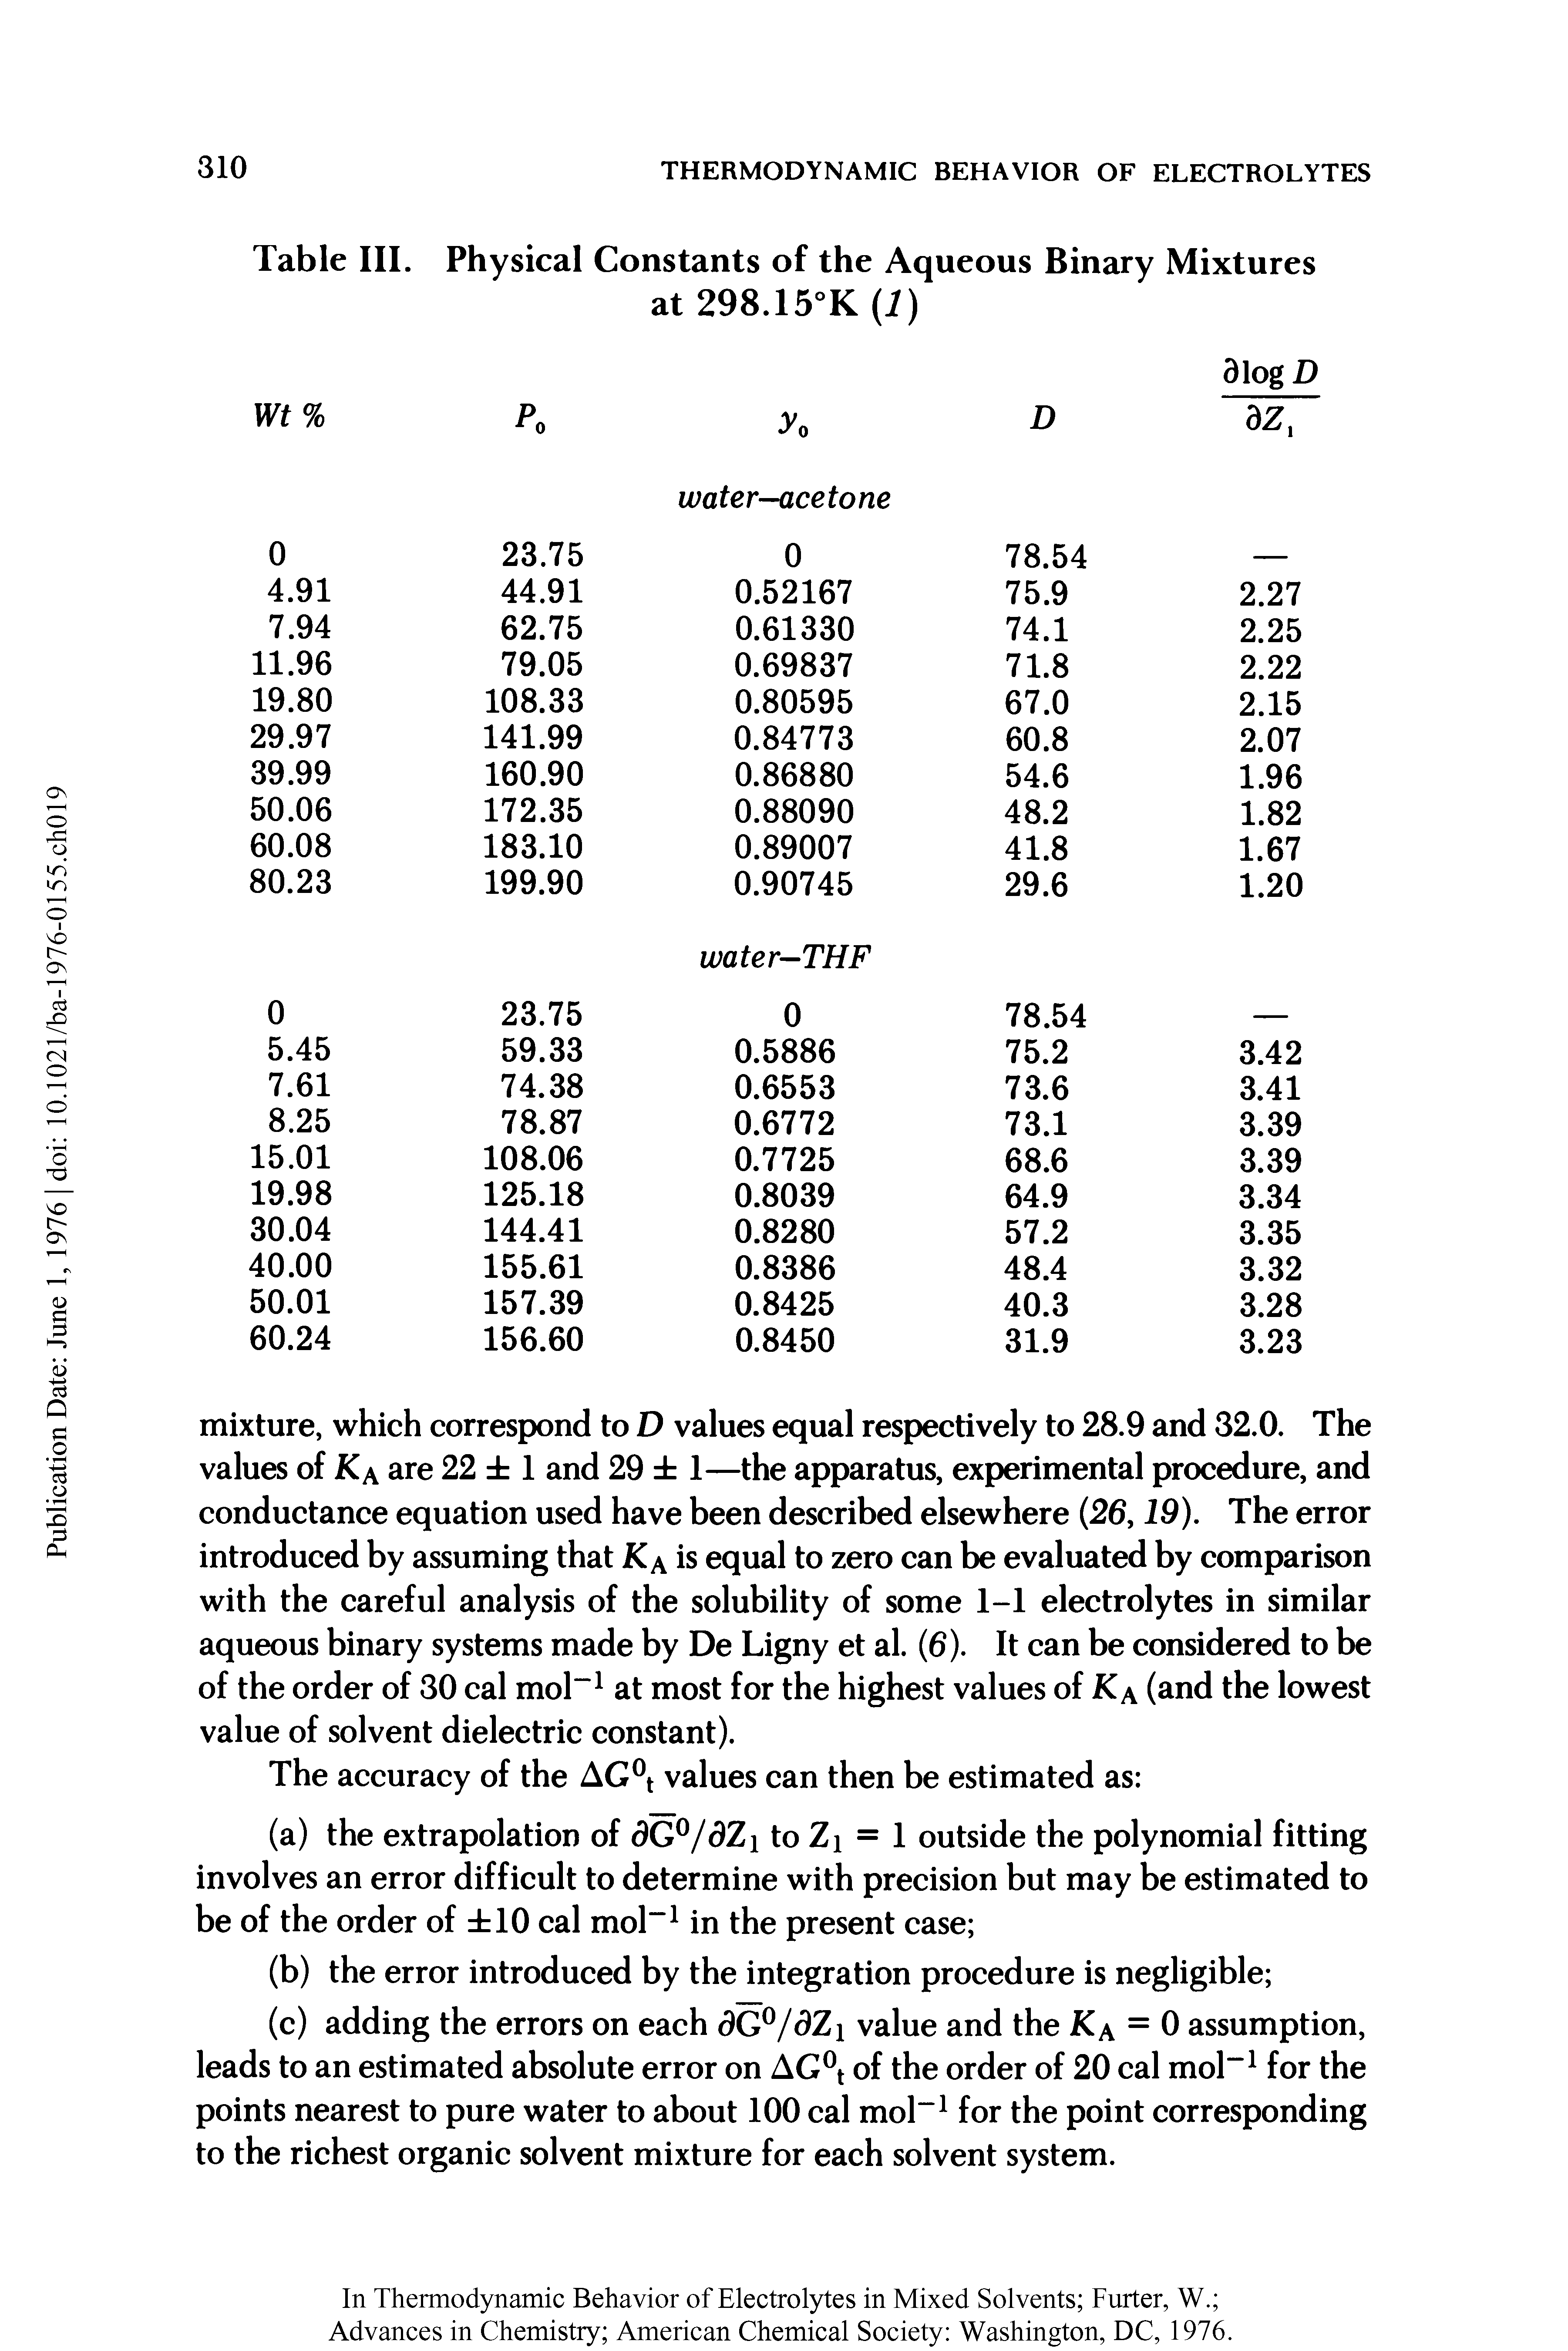 Table III. Physical Constants of the Aqueous Binary Mixtures...